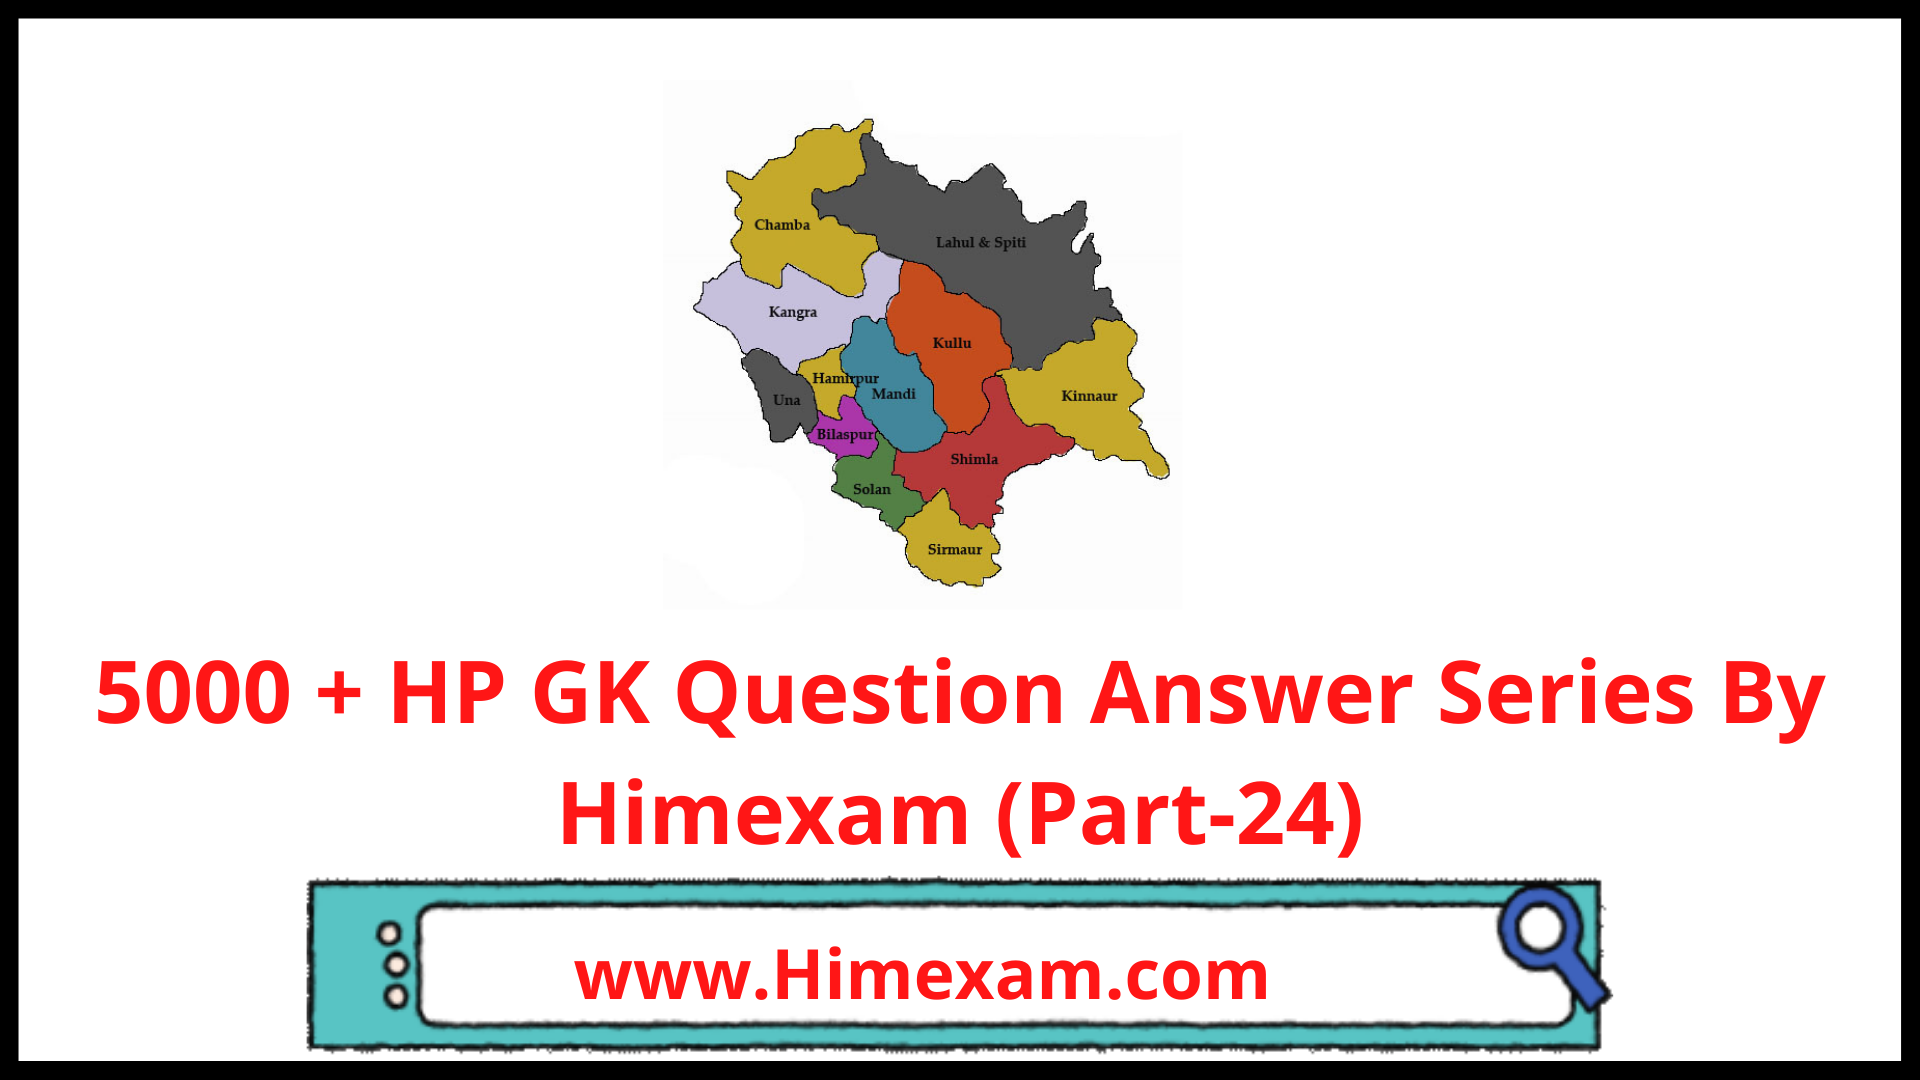 5000 + HP GK Question Answer Series By Himexam (Part-24)